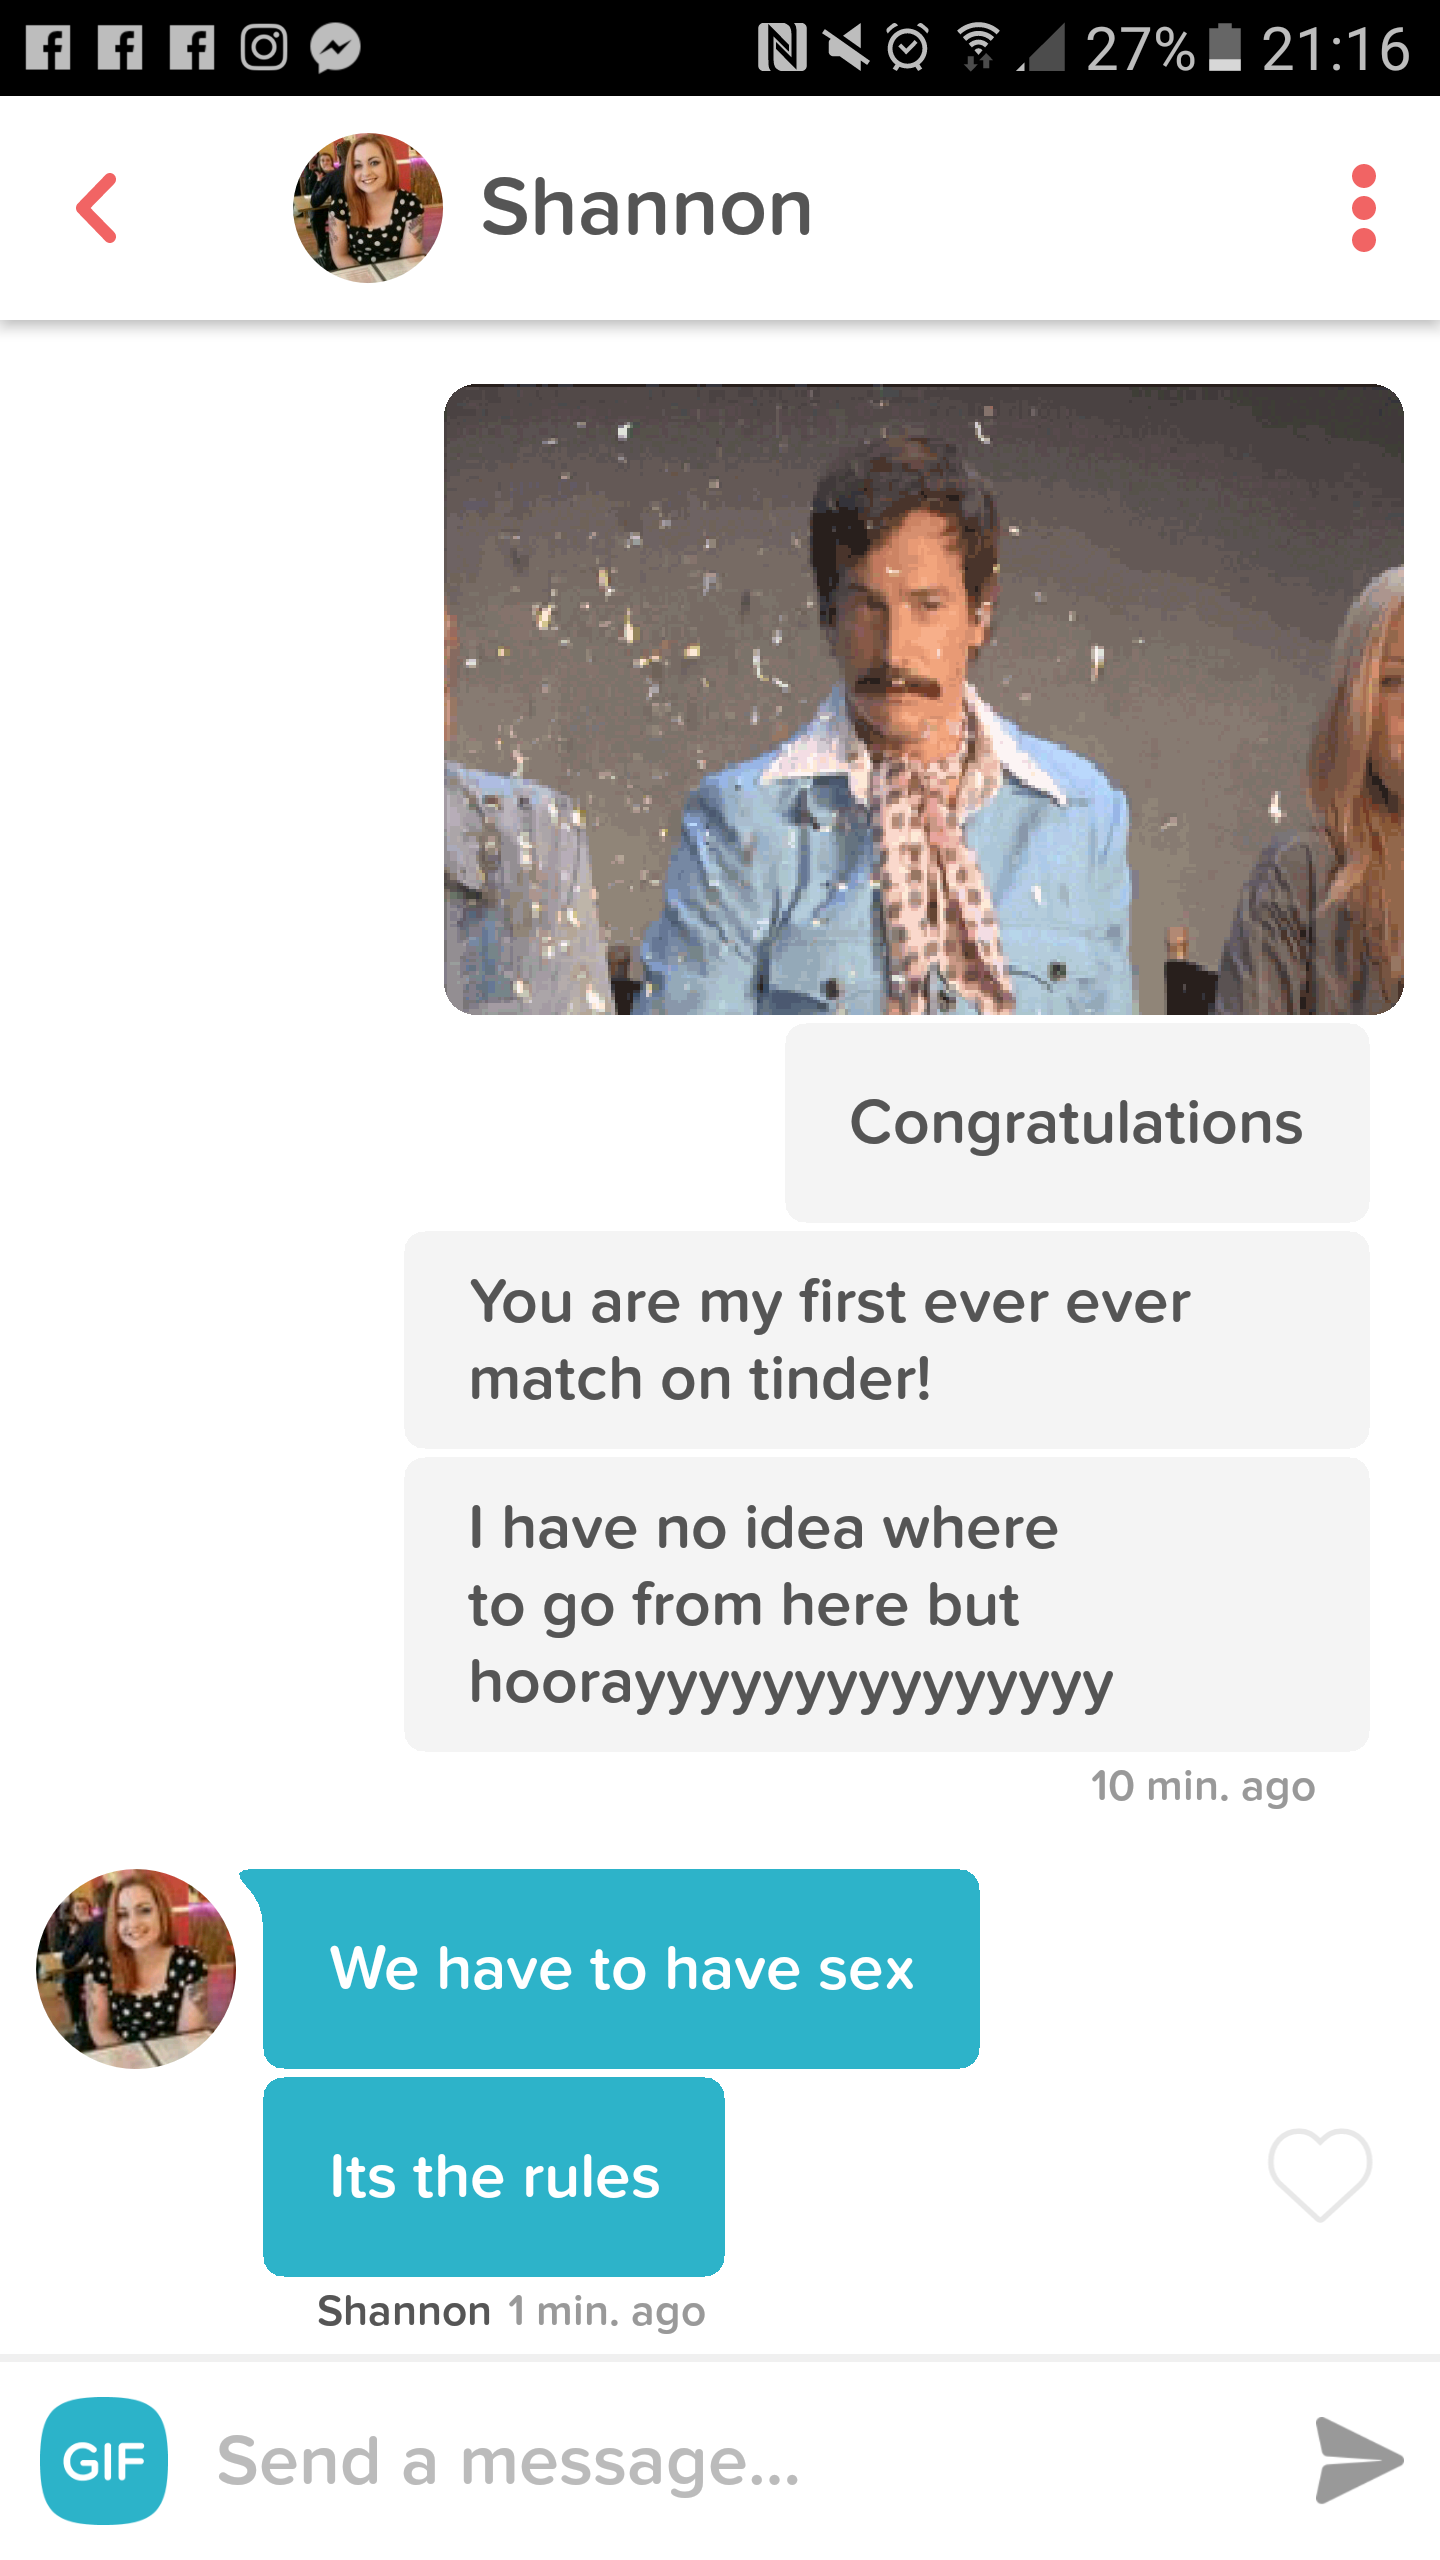 Welcome to Tinder